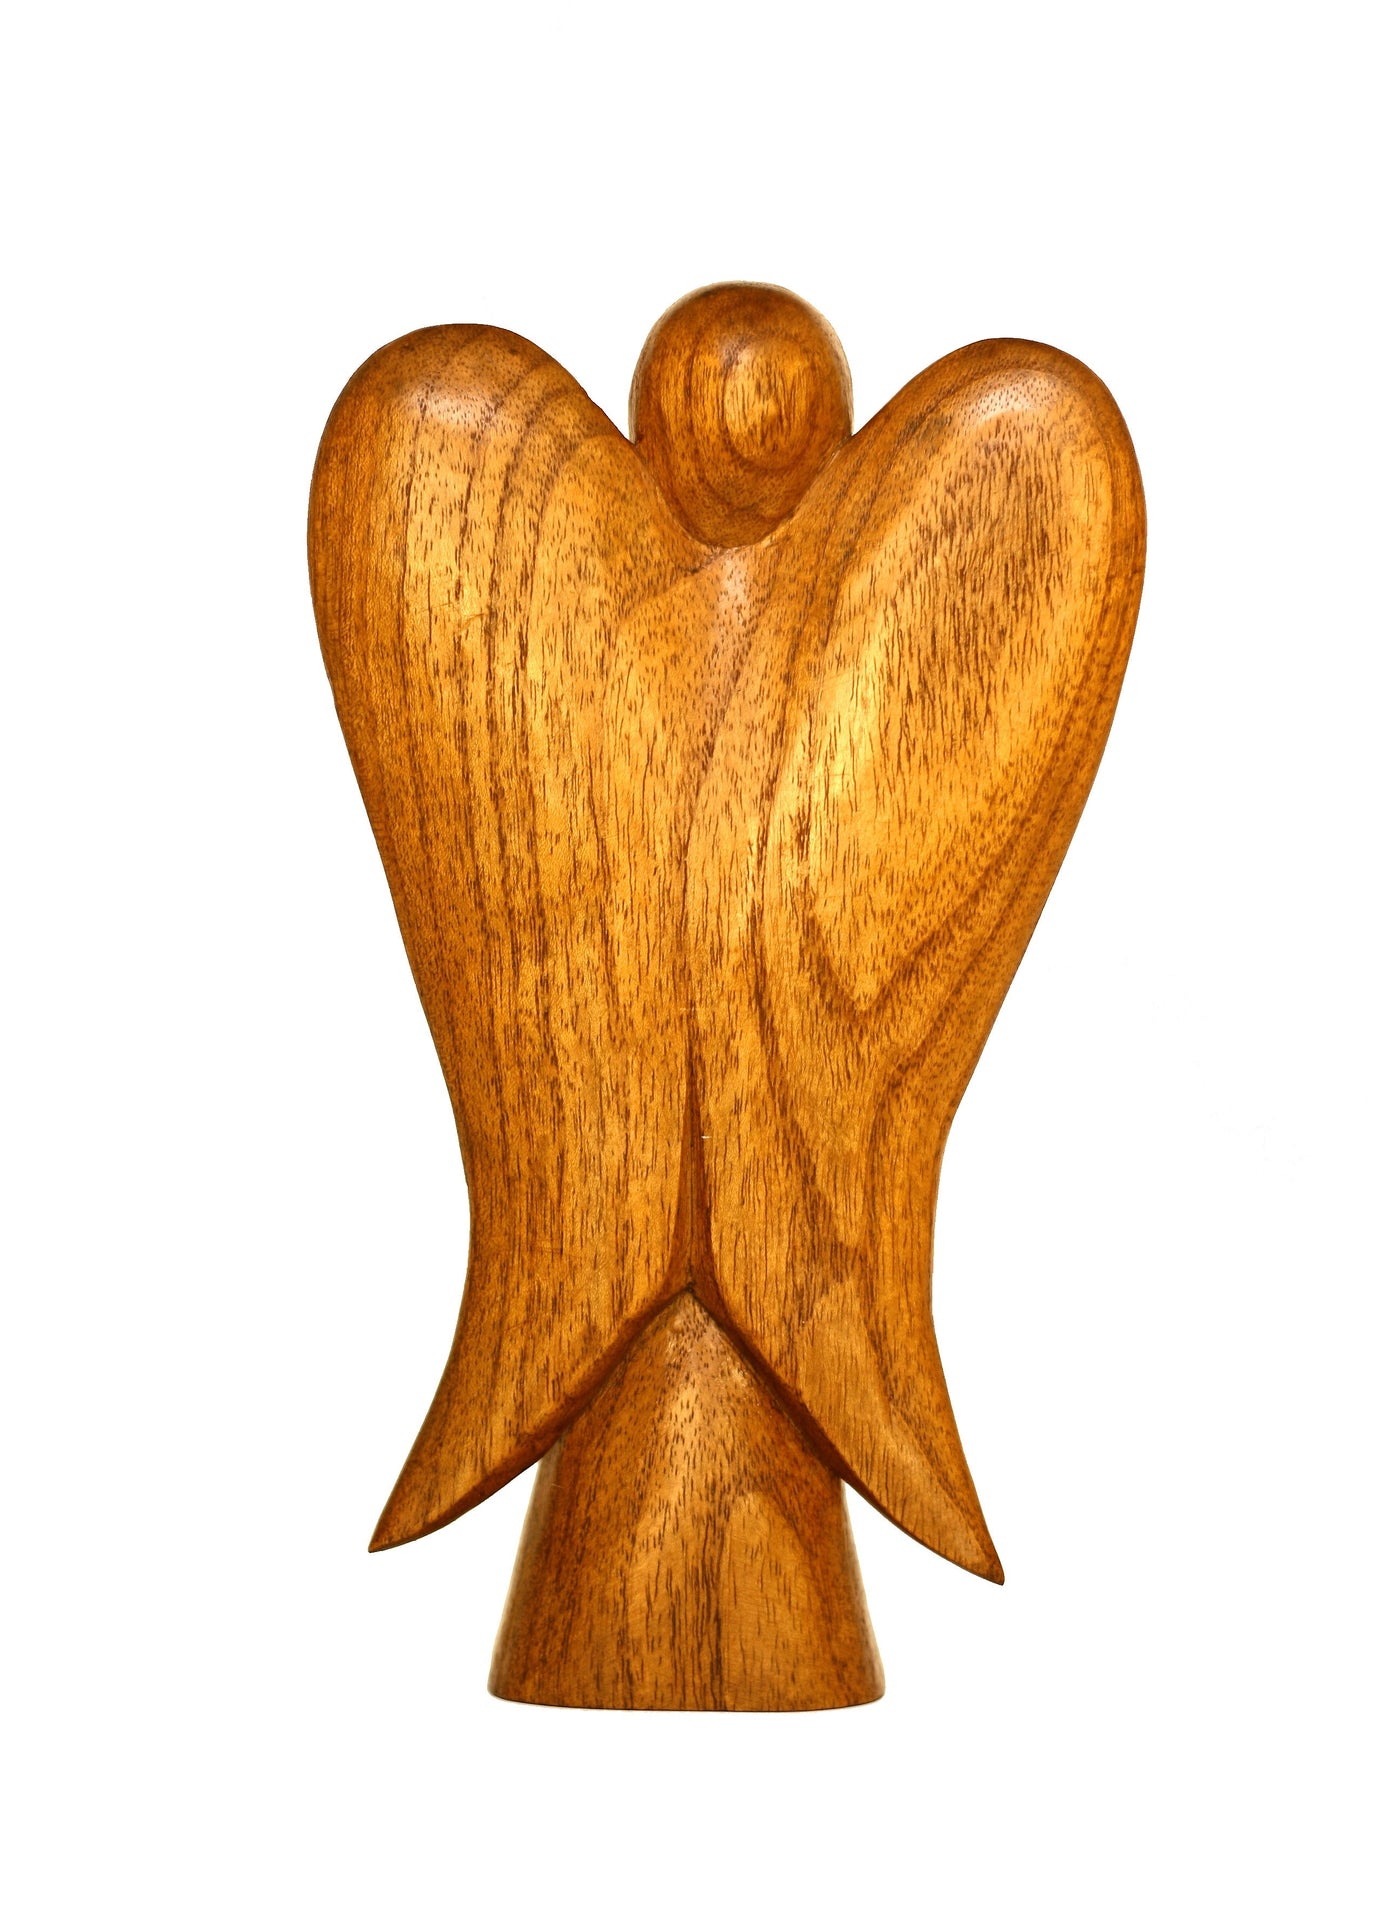 10" Wooden Handmade Abstract Sculpture Statue Handcrafted "Praying Angel" Gift Decorative Home Decor Figurine Accent Decoration Artwork Hand Carved